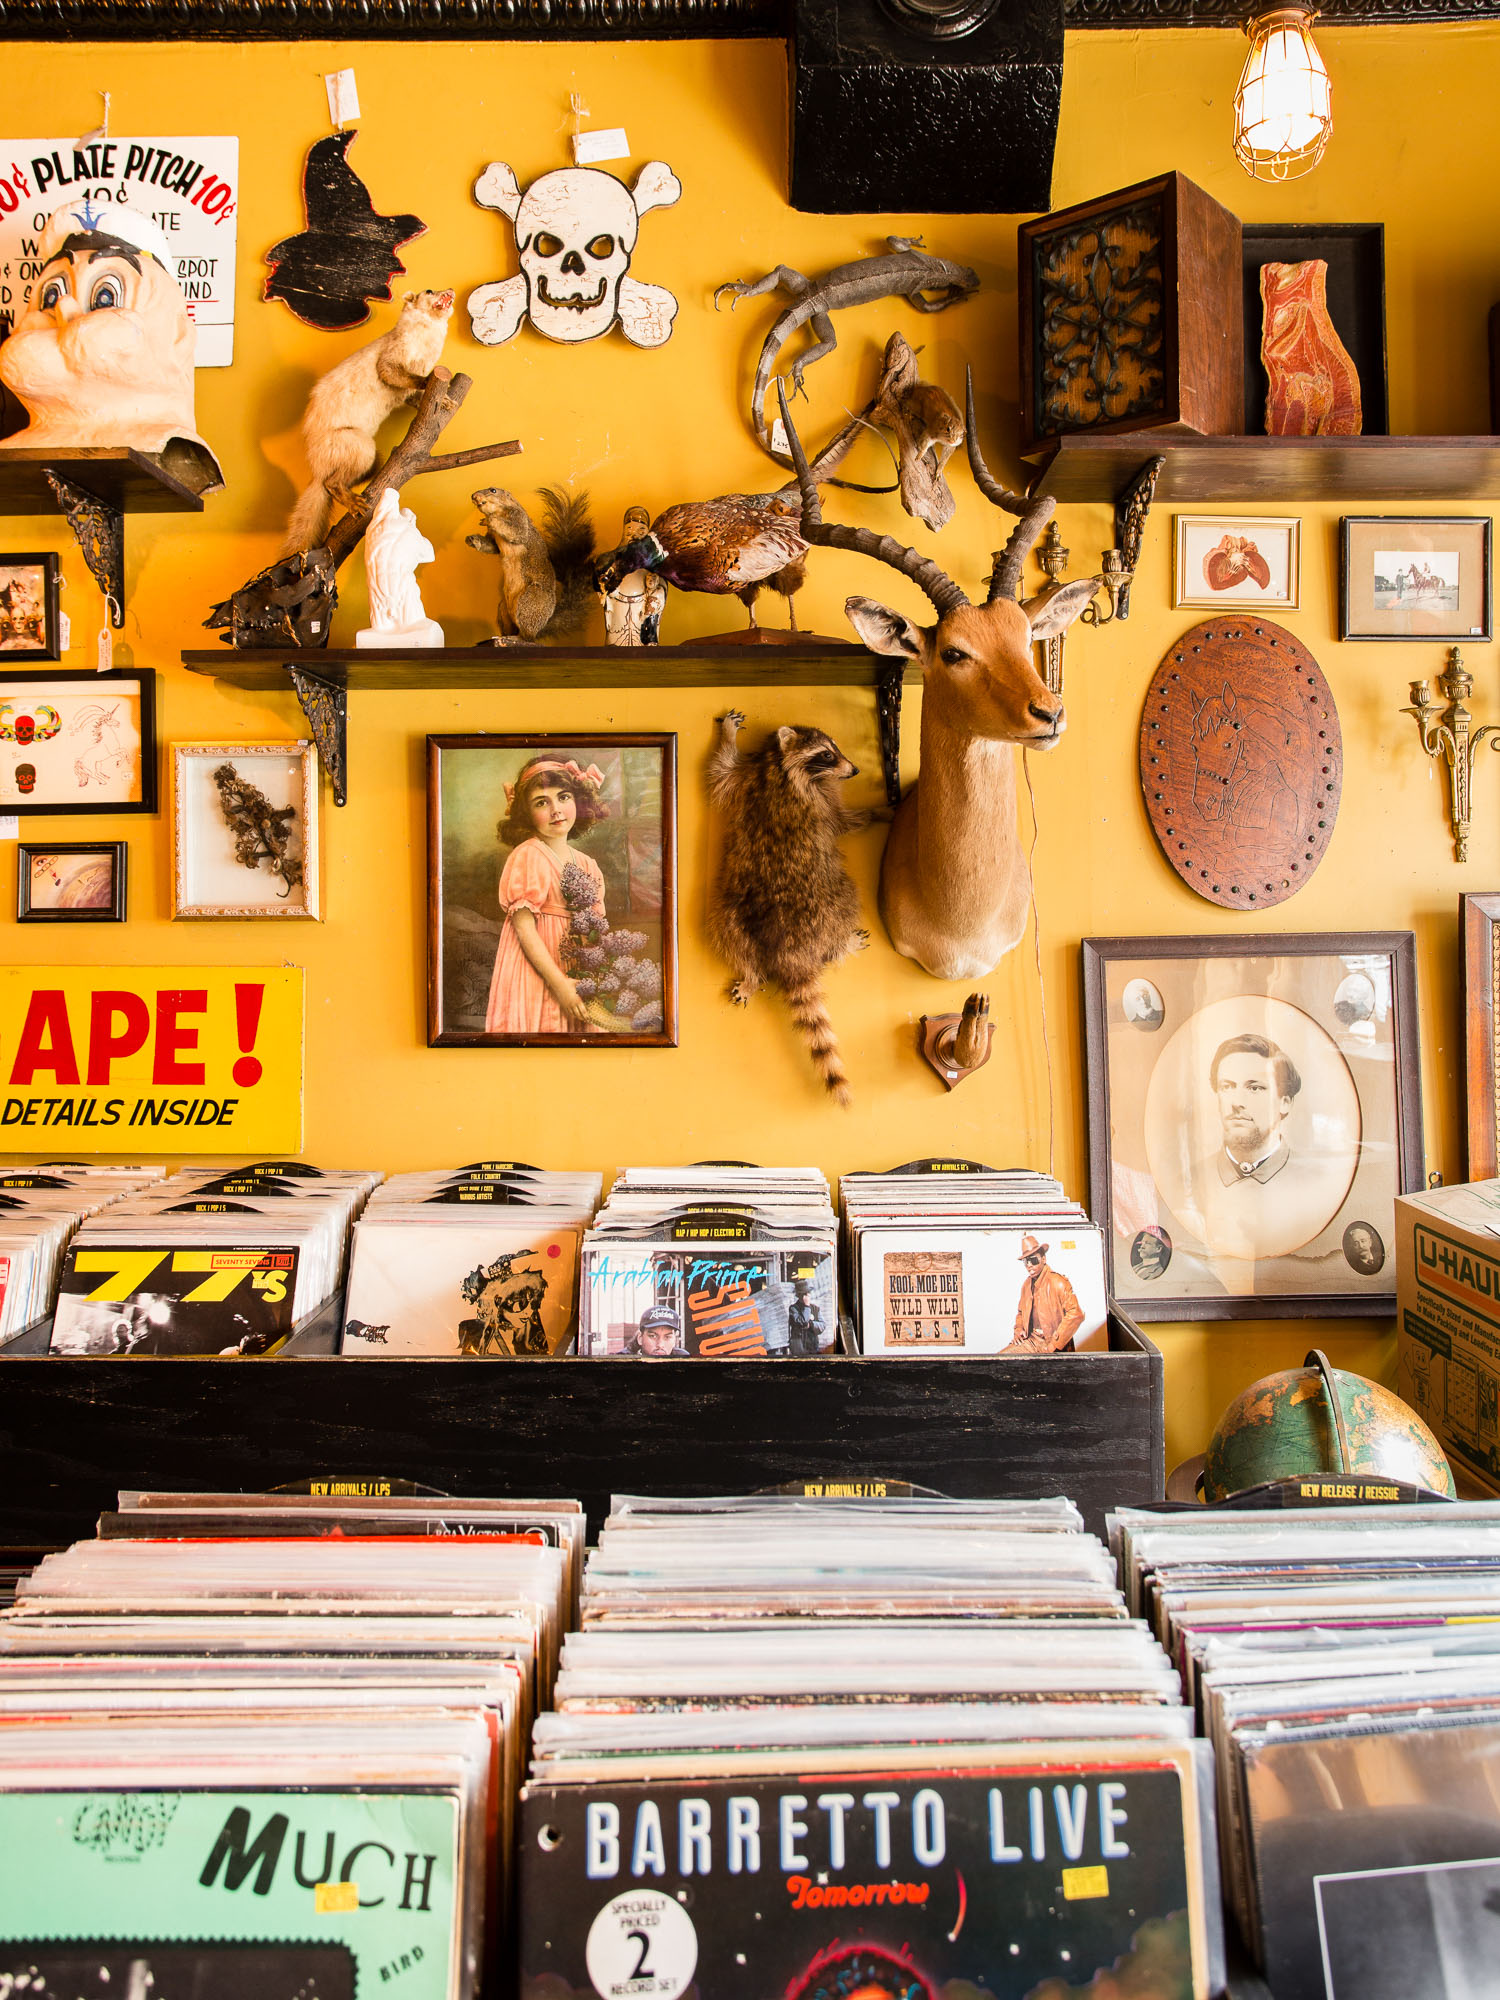 Bins of records and wall decor Black Gold, a vinyl, coffee, and antique shop in Brooklyn's Carroll Gardens.